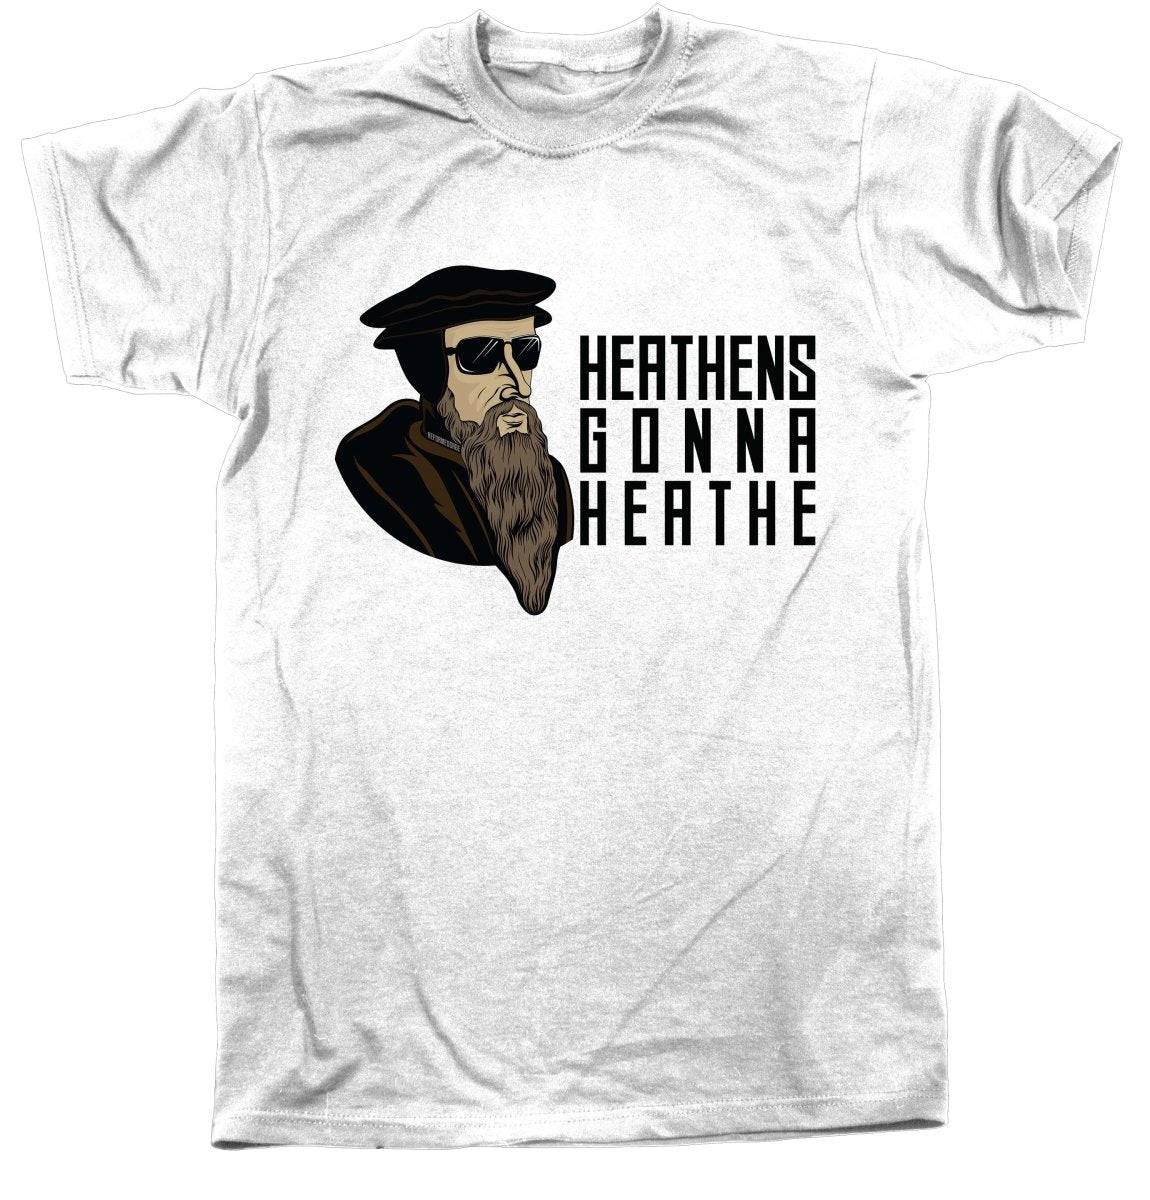 Shirt - Heathens GONNA HEATHE - Tee RETIRED - The Reformed Sage - #reformed# - #reformed_gifts# - #christian_gifts#